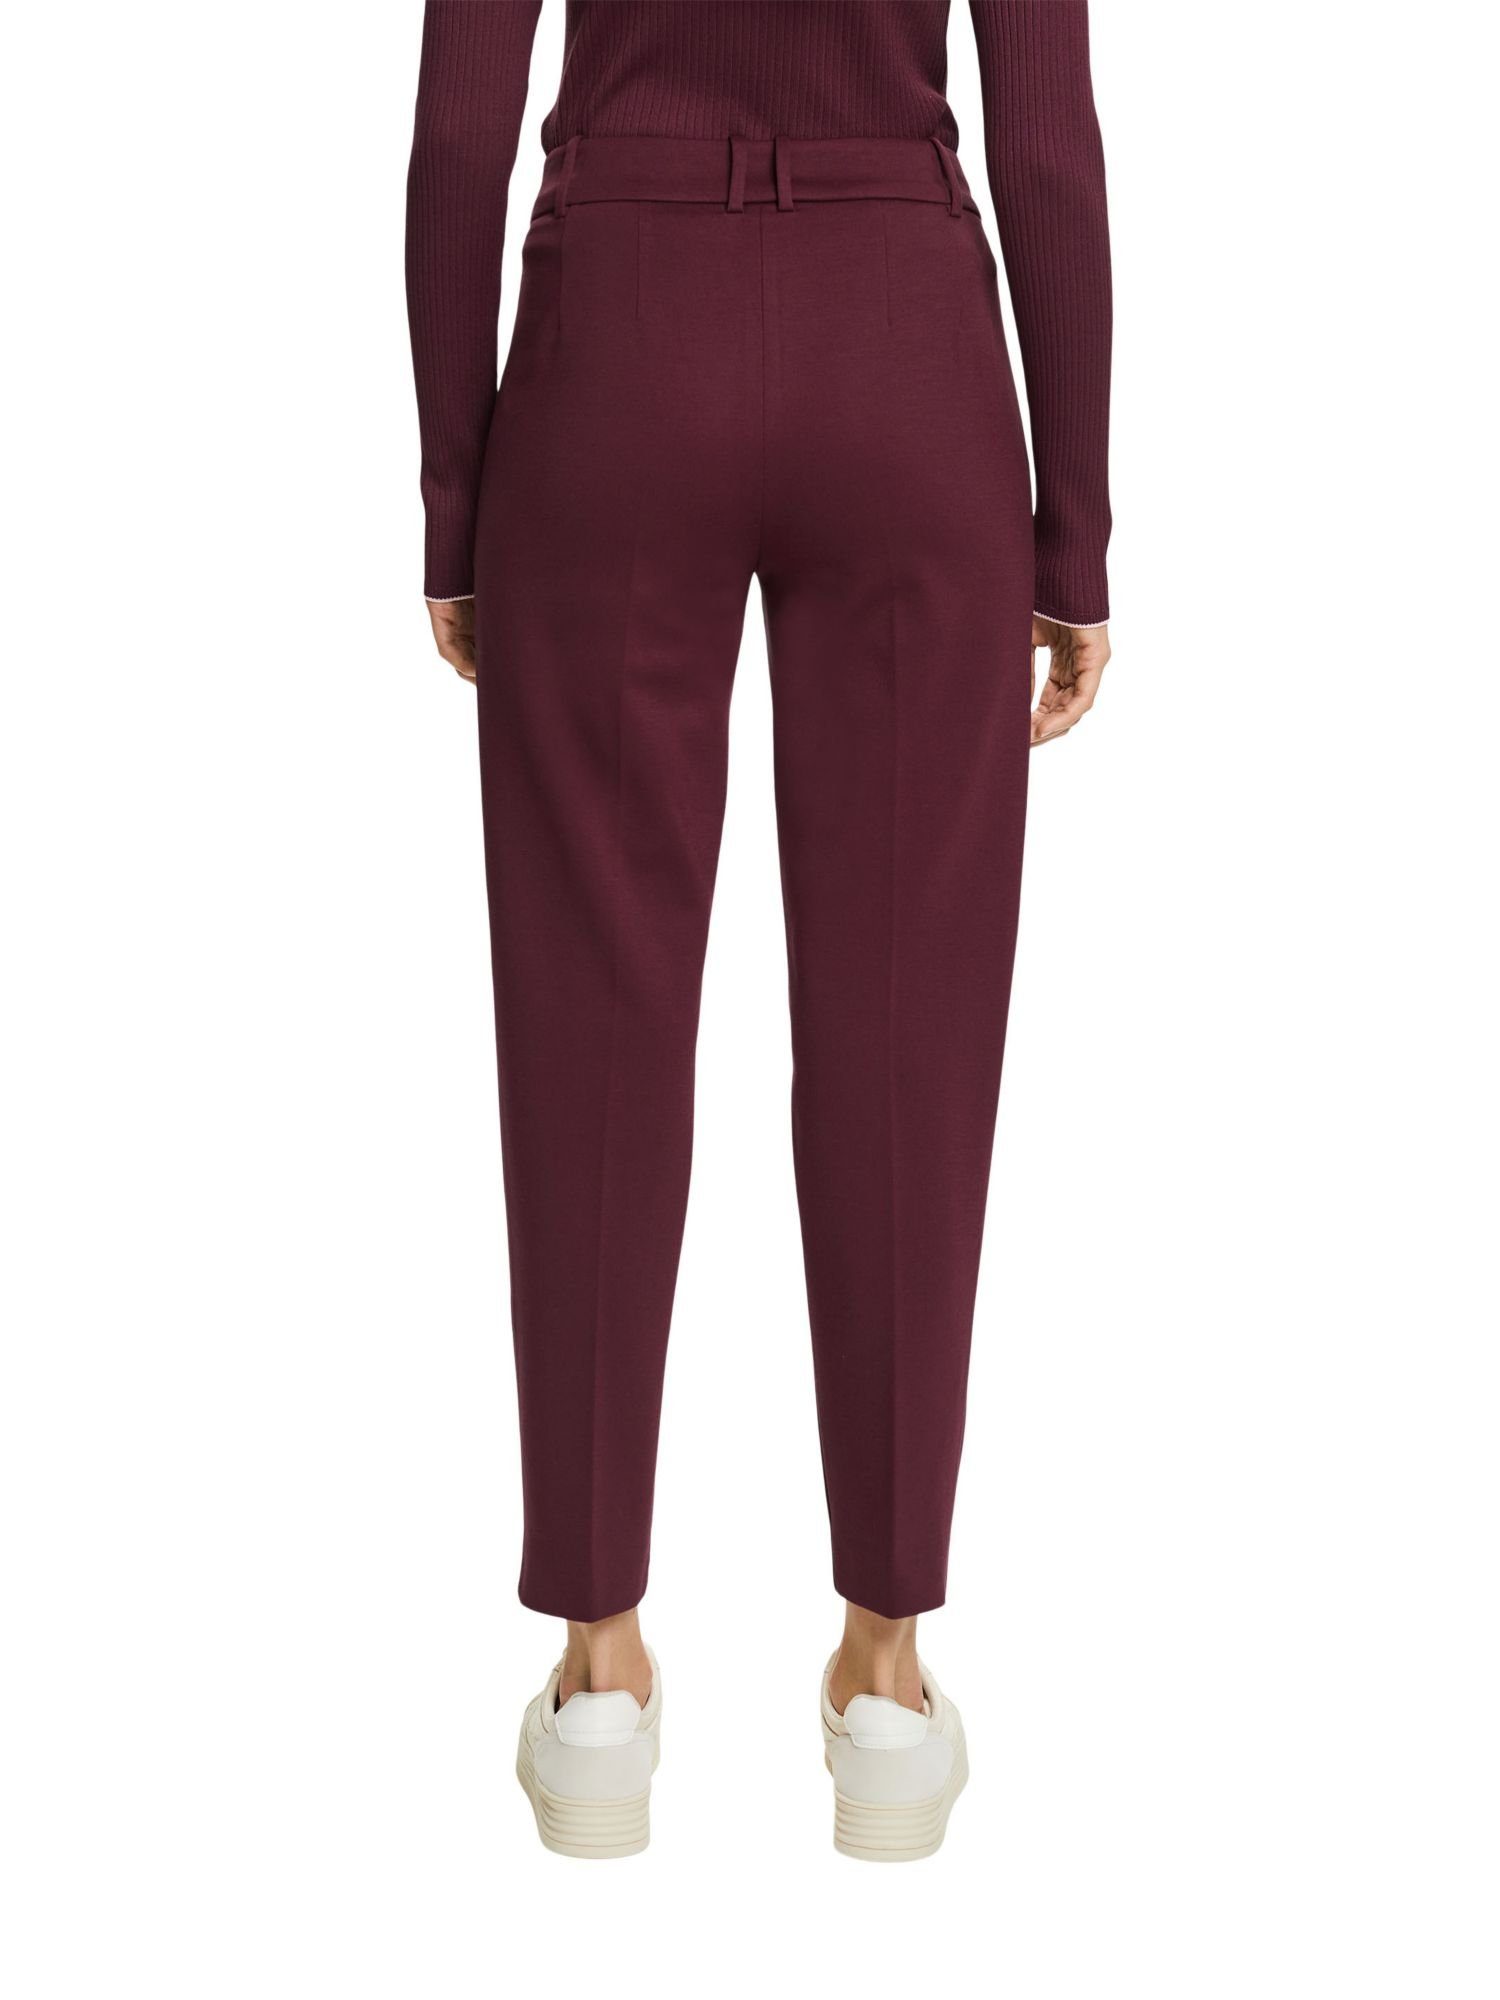 Pants PUNTO Mix & Tapered Esprit Stretch-Hose Match Collection AUBERGINE SPORTY